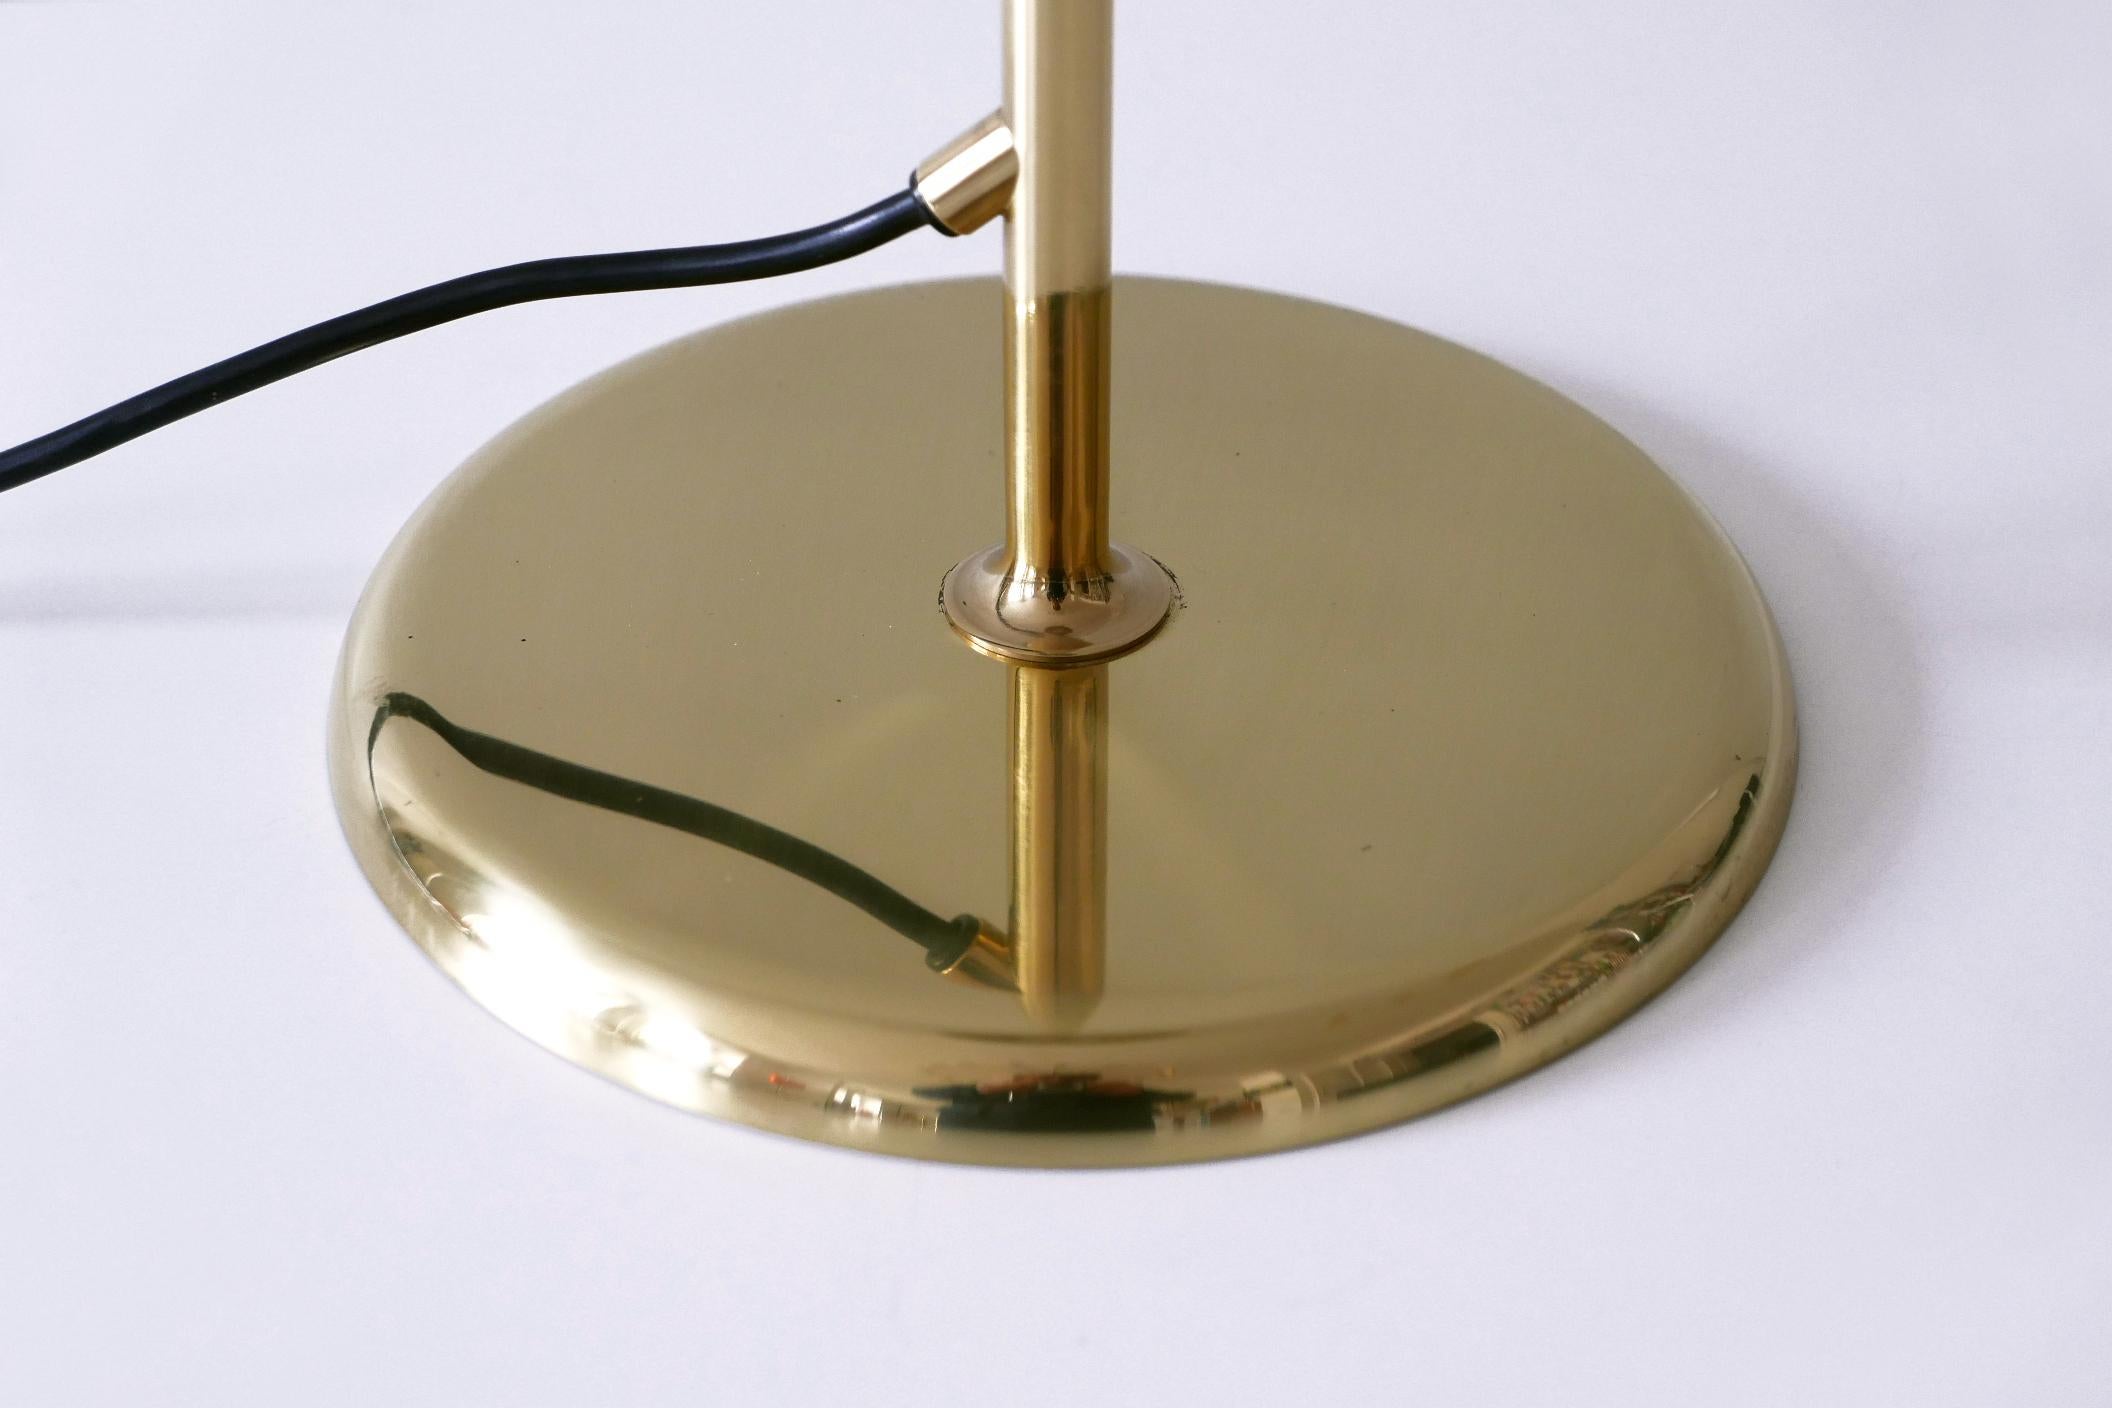 Articulated Brass Floor Lamp or Reading Light by Florian Schulz 1980s Germany 13